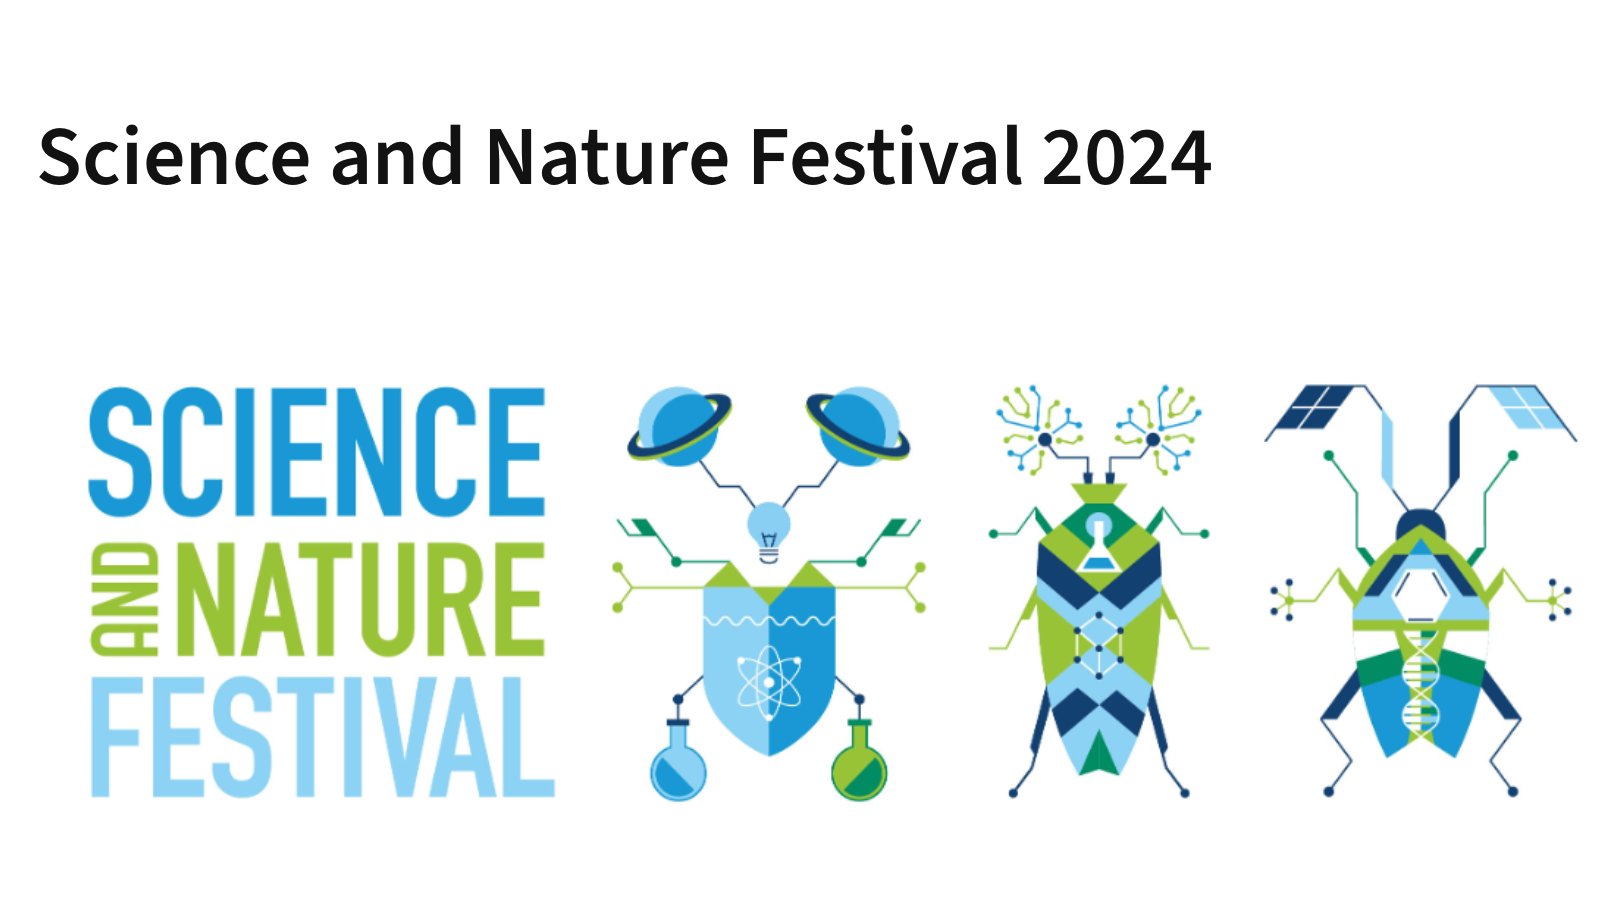 Science and Nature Festival 2024